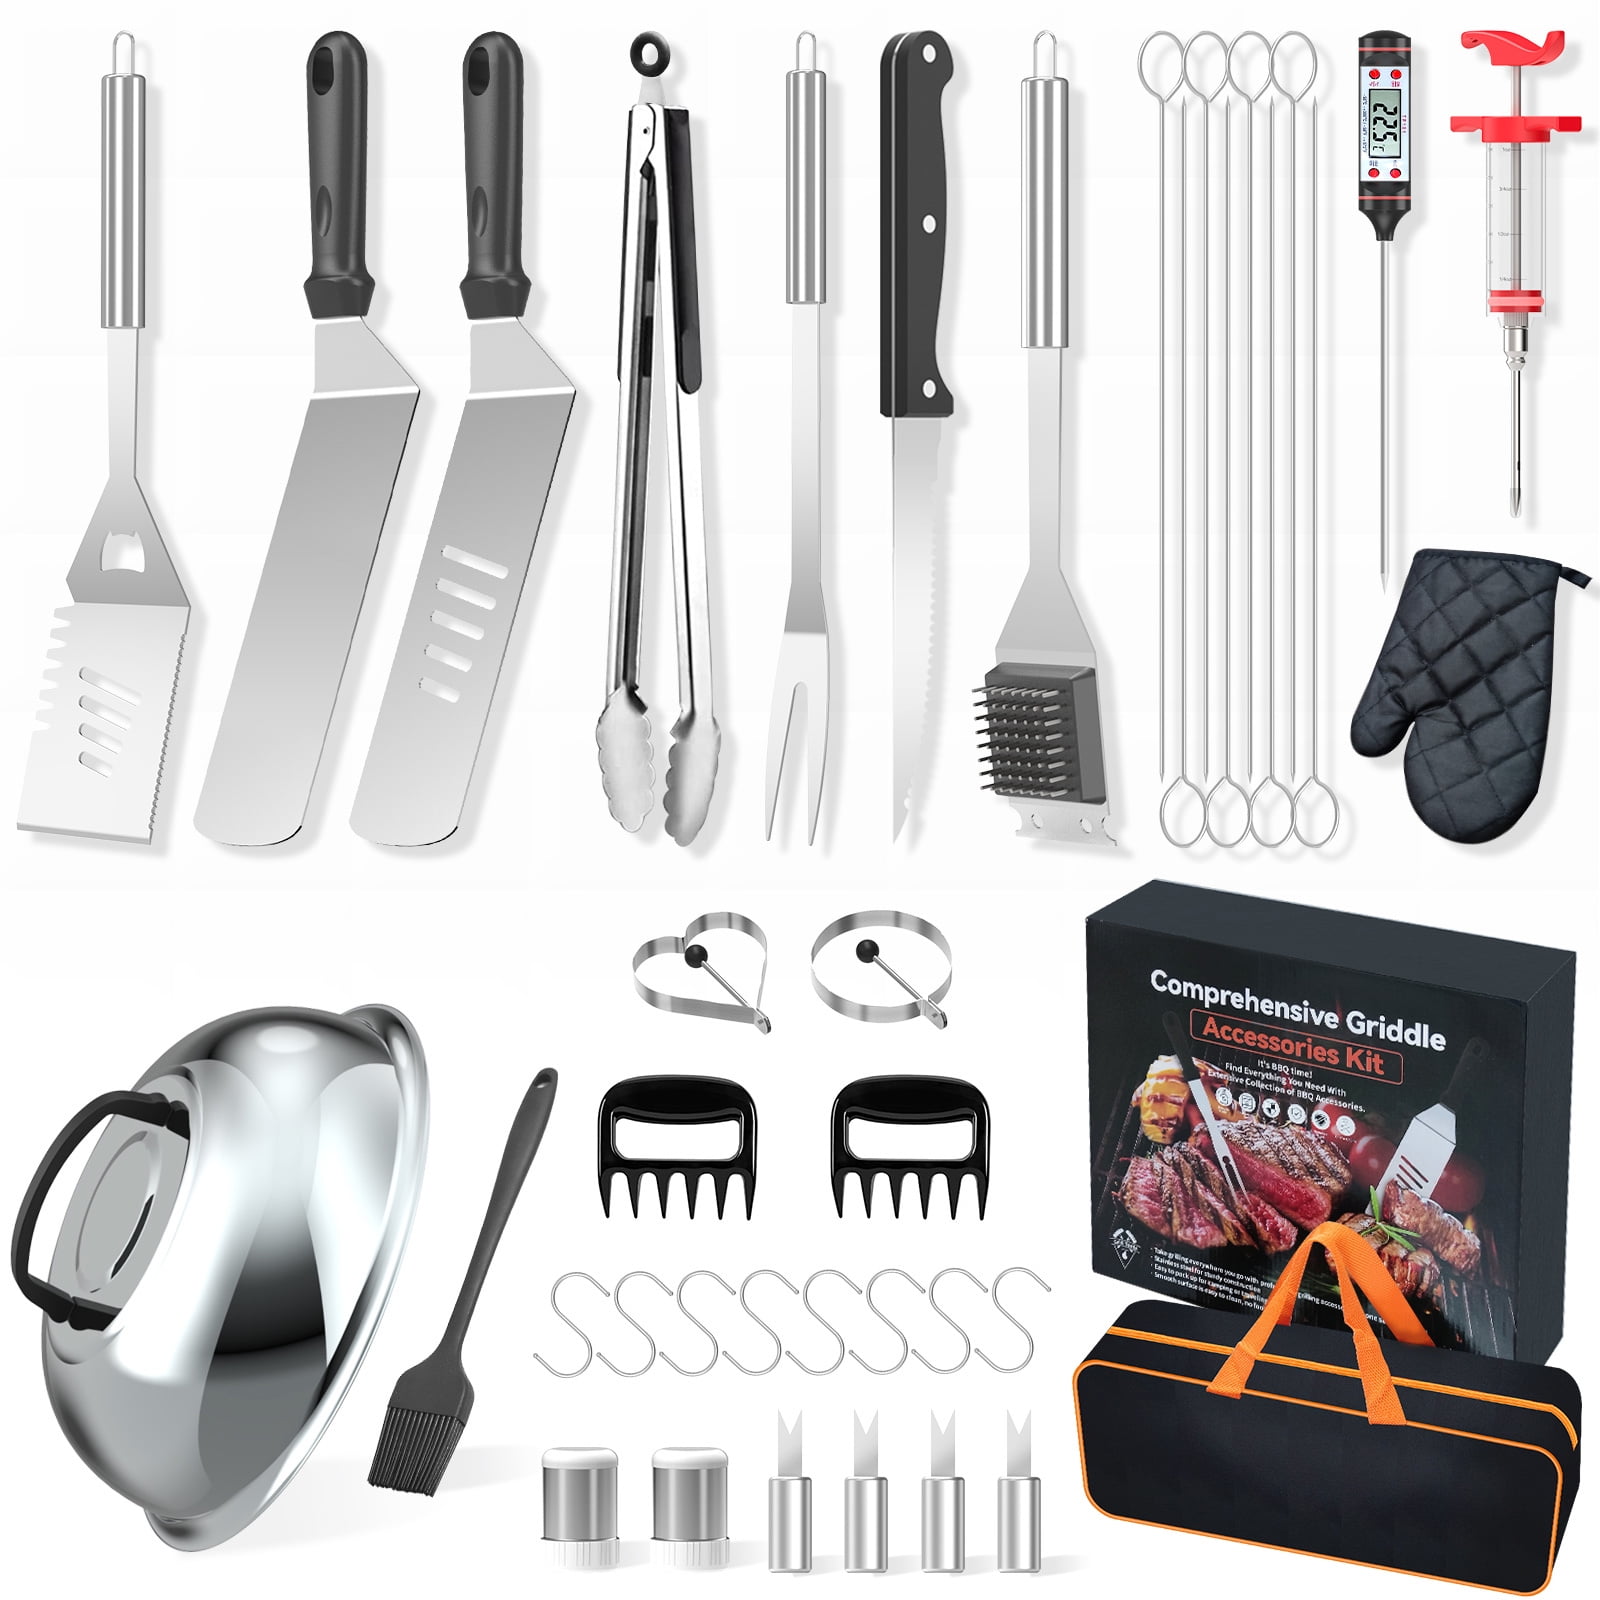  Griddle Accessories, 37 PCS Stainless Steel Grilling Kit, Flat  Top Grill Accessories for Blackstone and Camp Chef, Barbecue Utensil Gift  with Basting Cover, Thermometer, Meat Injector & Meat Claws 